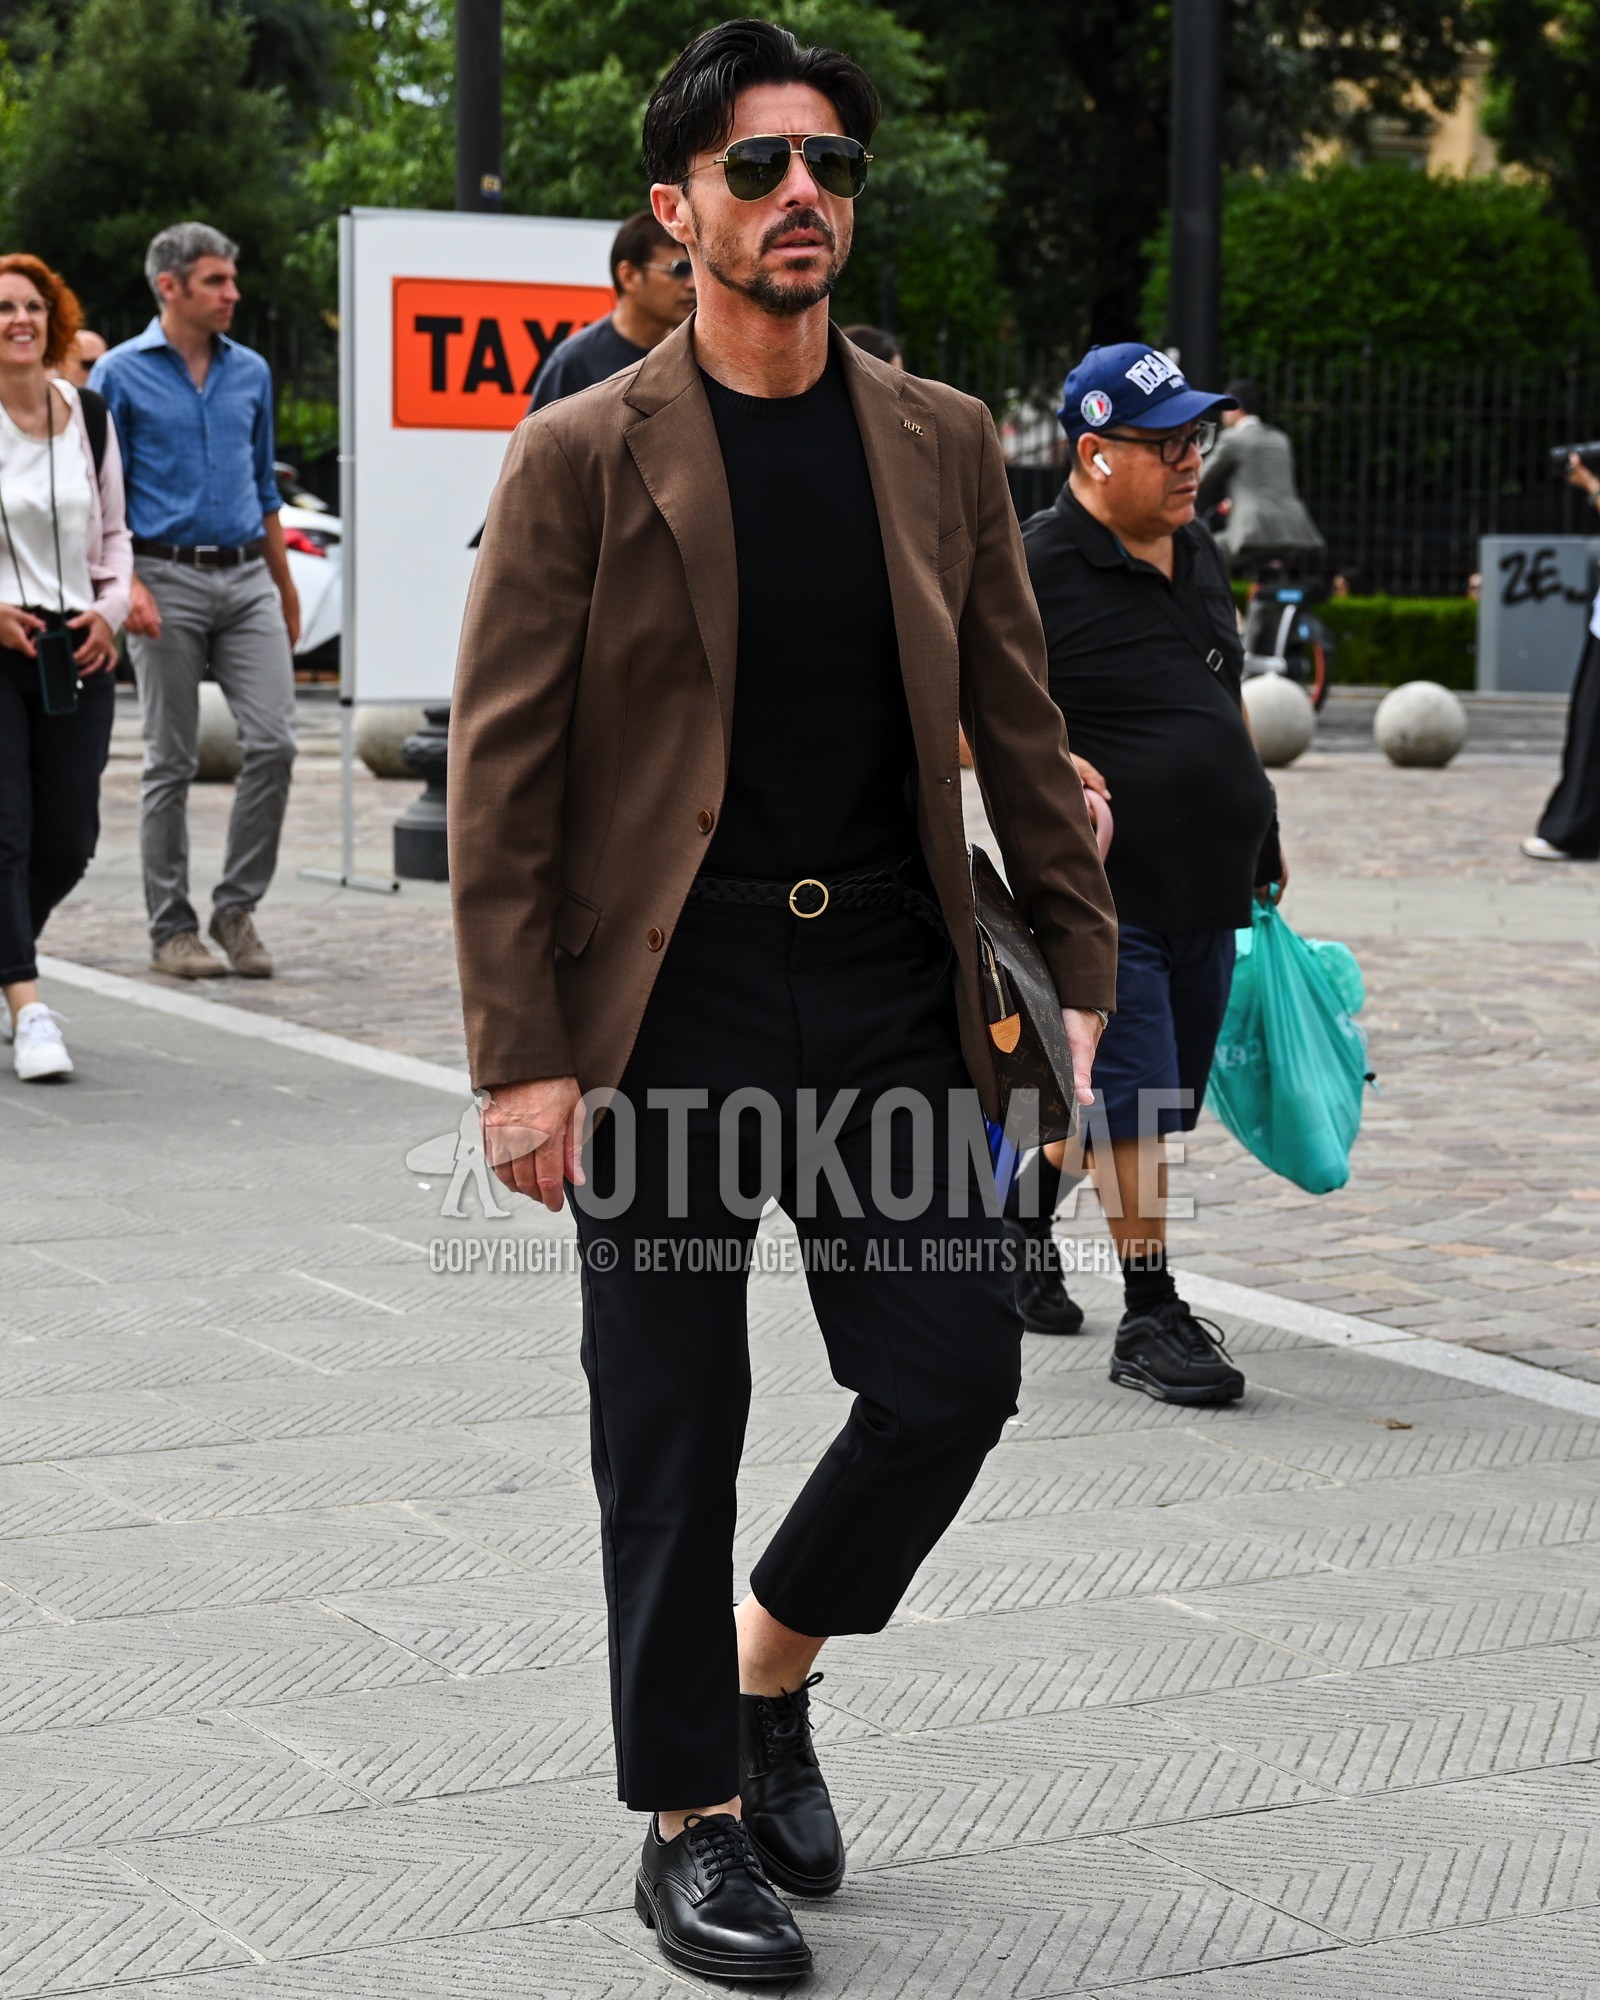 Men's spring summer autumn outfit with black plain sunglasses, brown plain tailored jacket, black plain t-shirt, black plain leather belt, black plain slacks, black plain toe leather shoes.